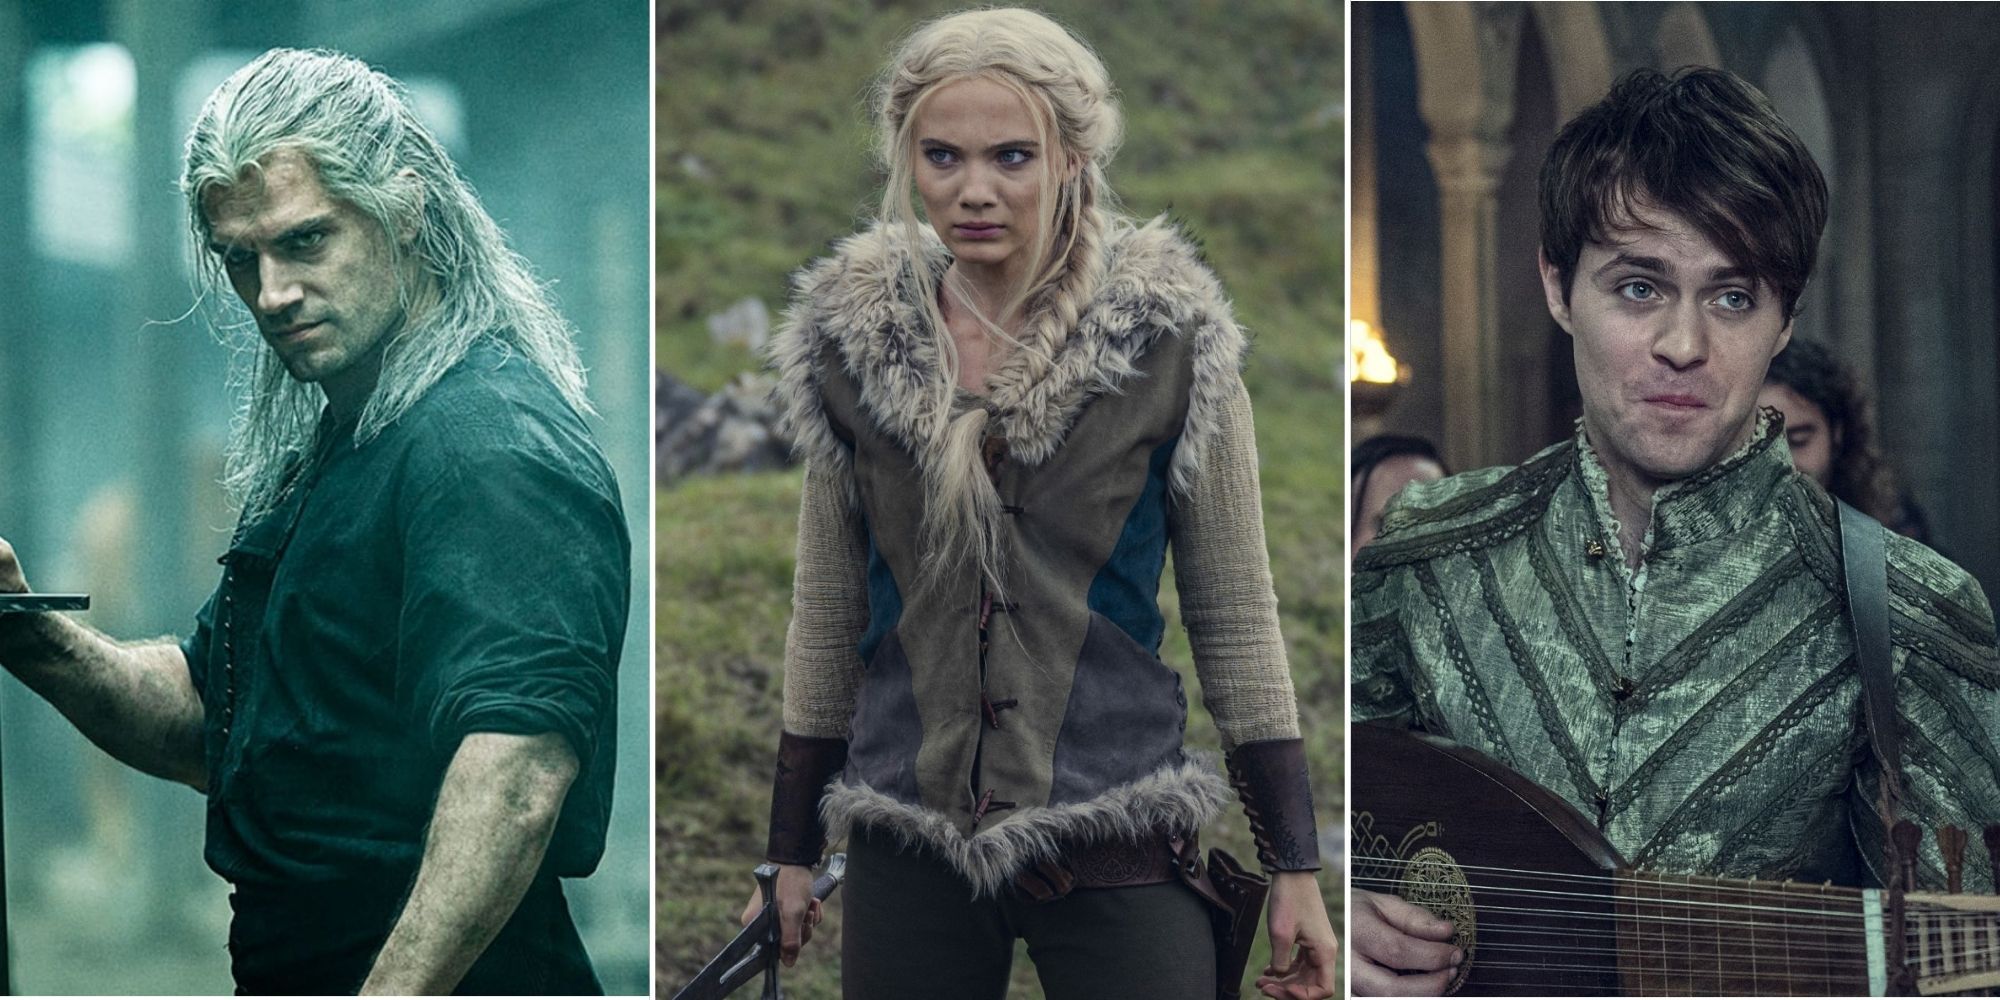 Henry Cavill as Geralt Freya Allan as Ciri and Joey Batey as Jaskier in The Witcher